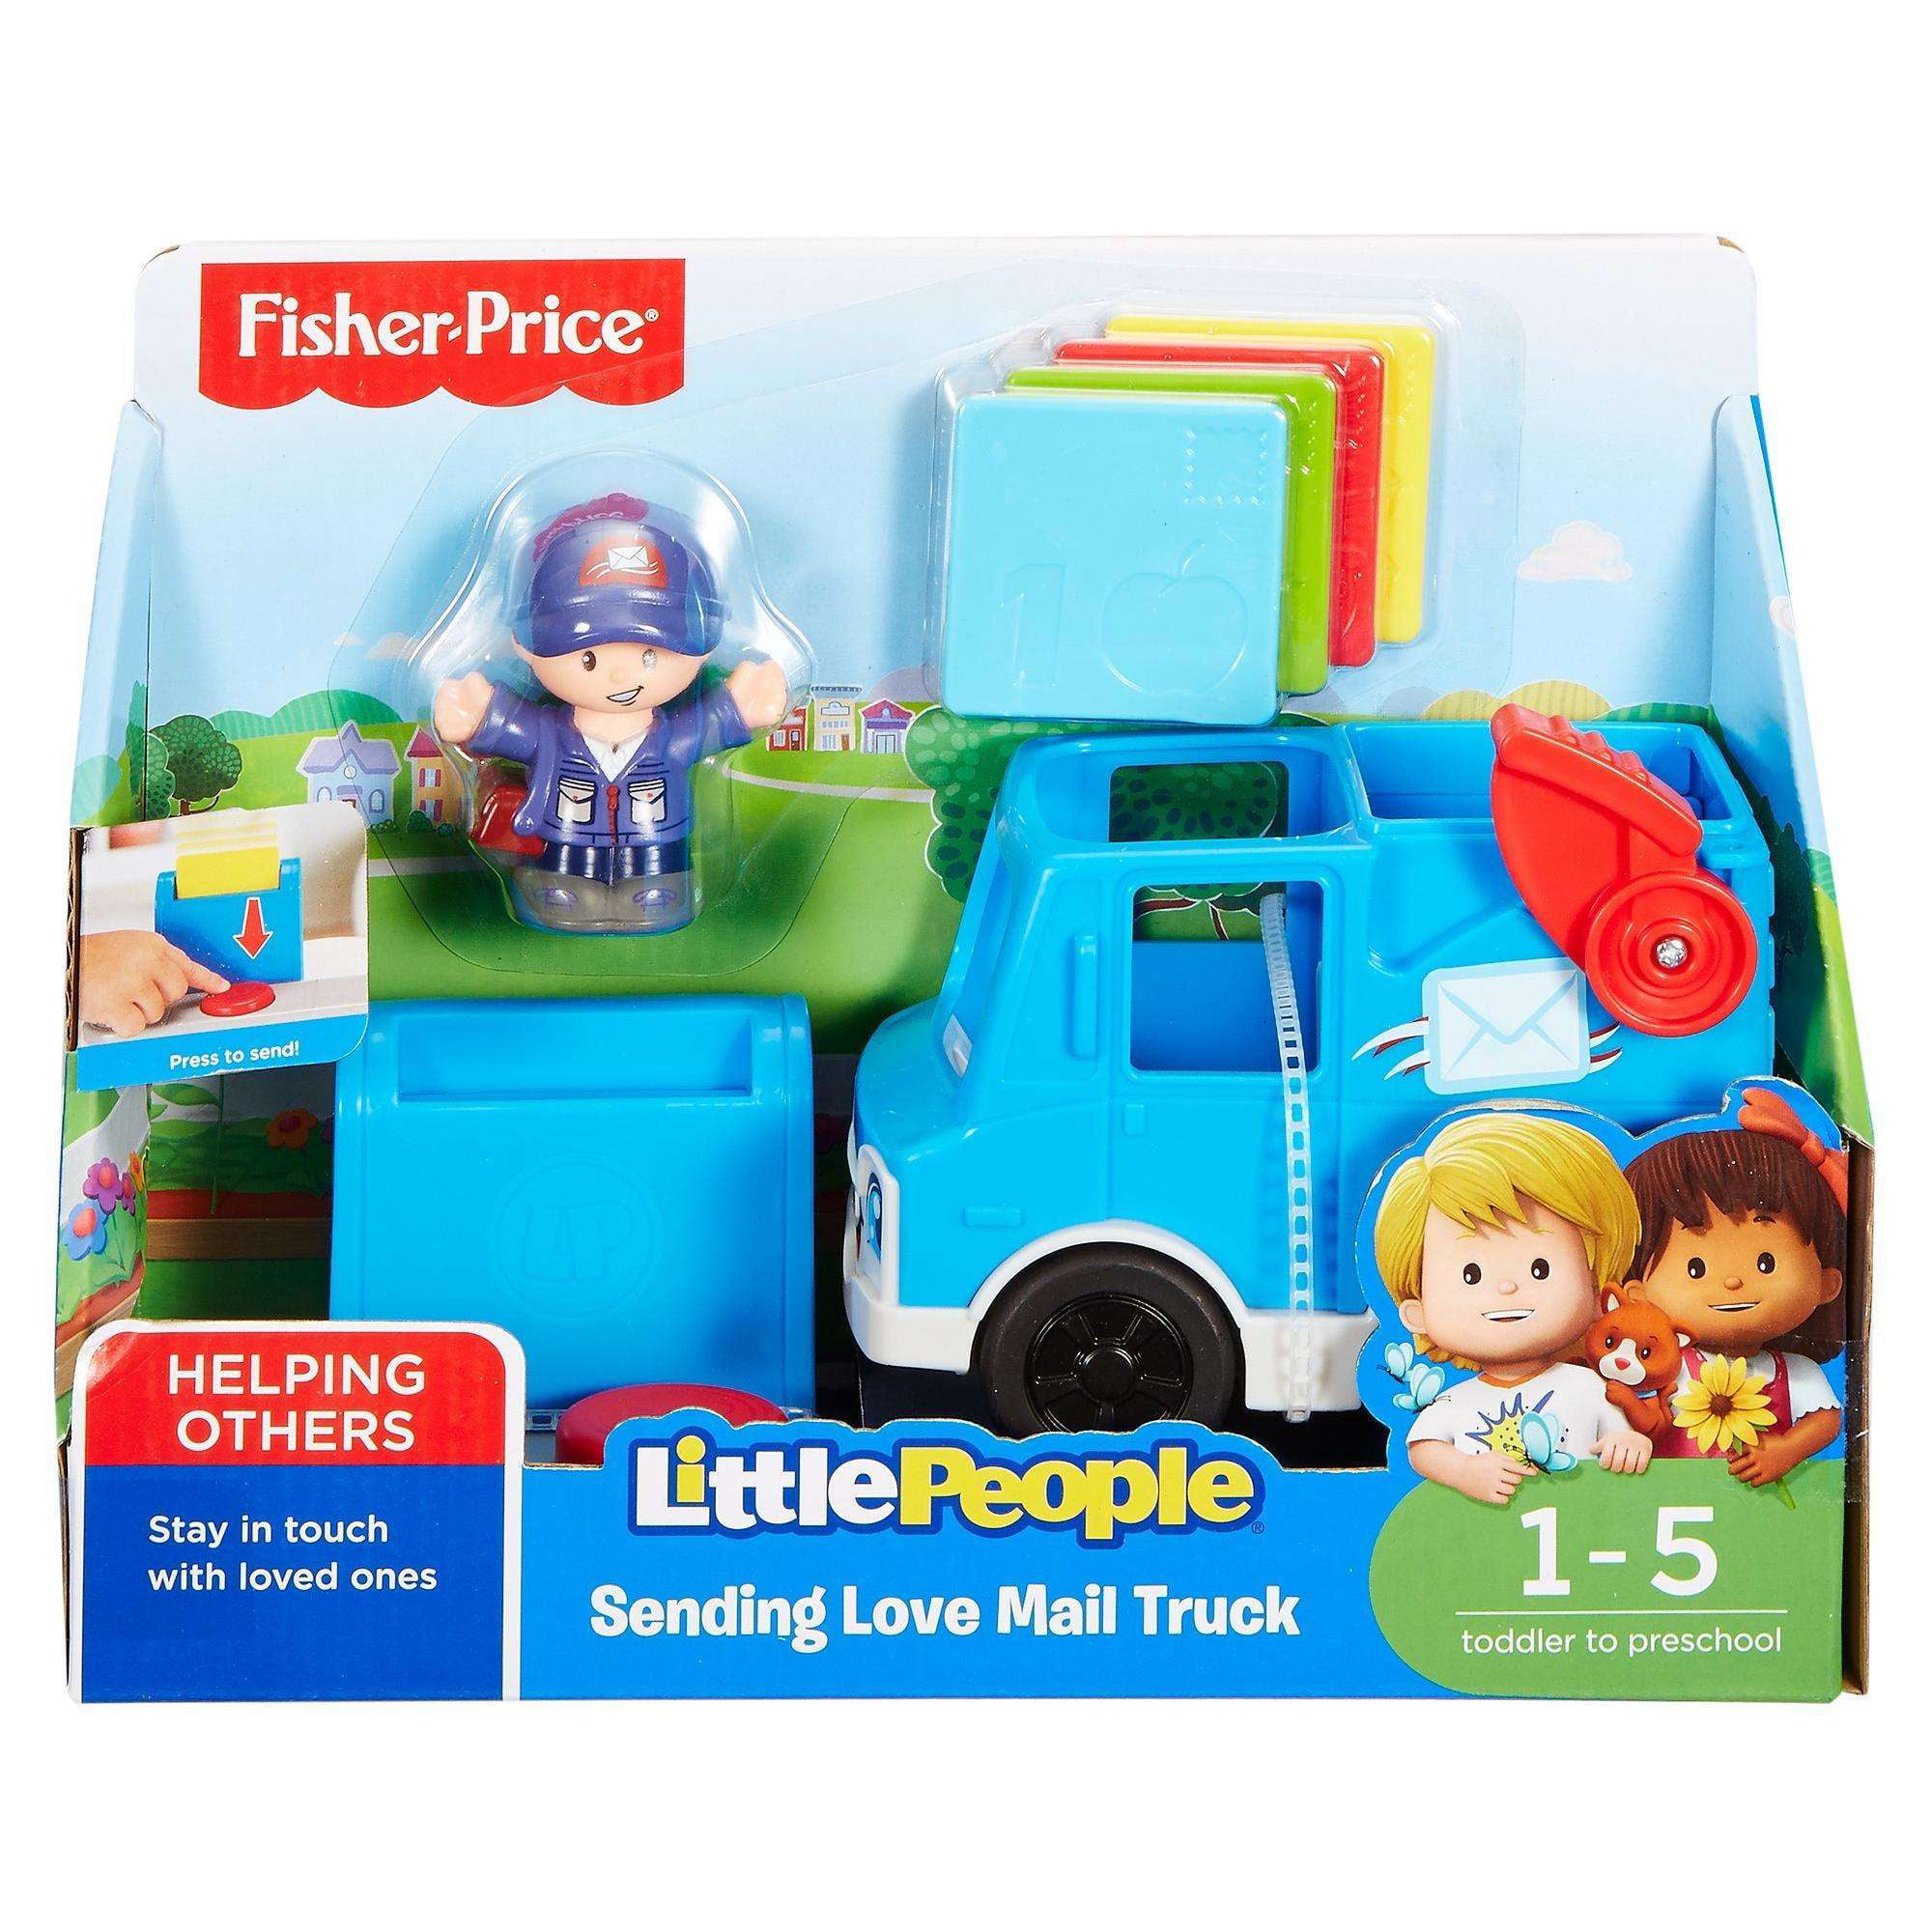 New Fisher Price Little People BLUE 4 CUPCAKES LETTER Mailman Truck Sending Mail 